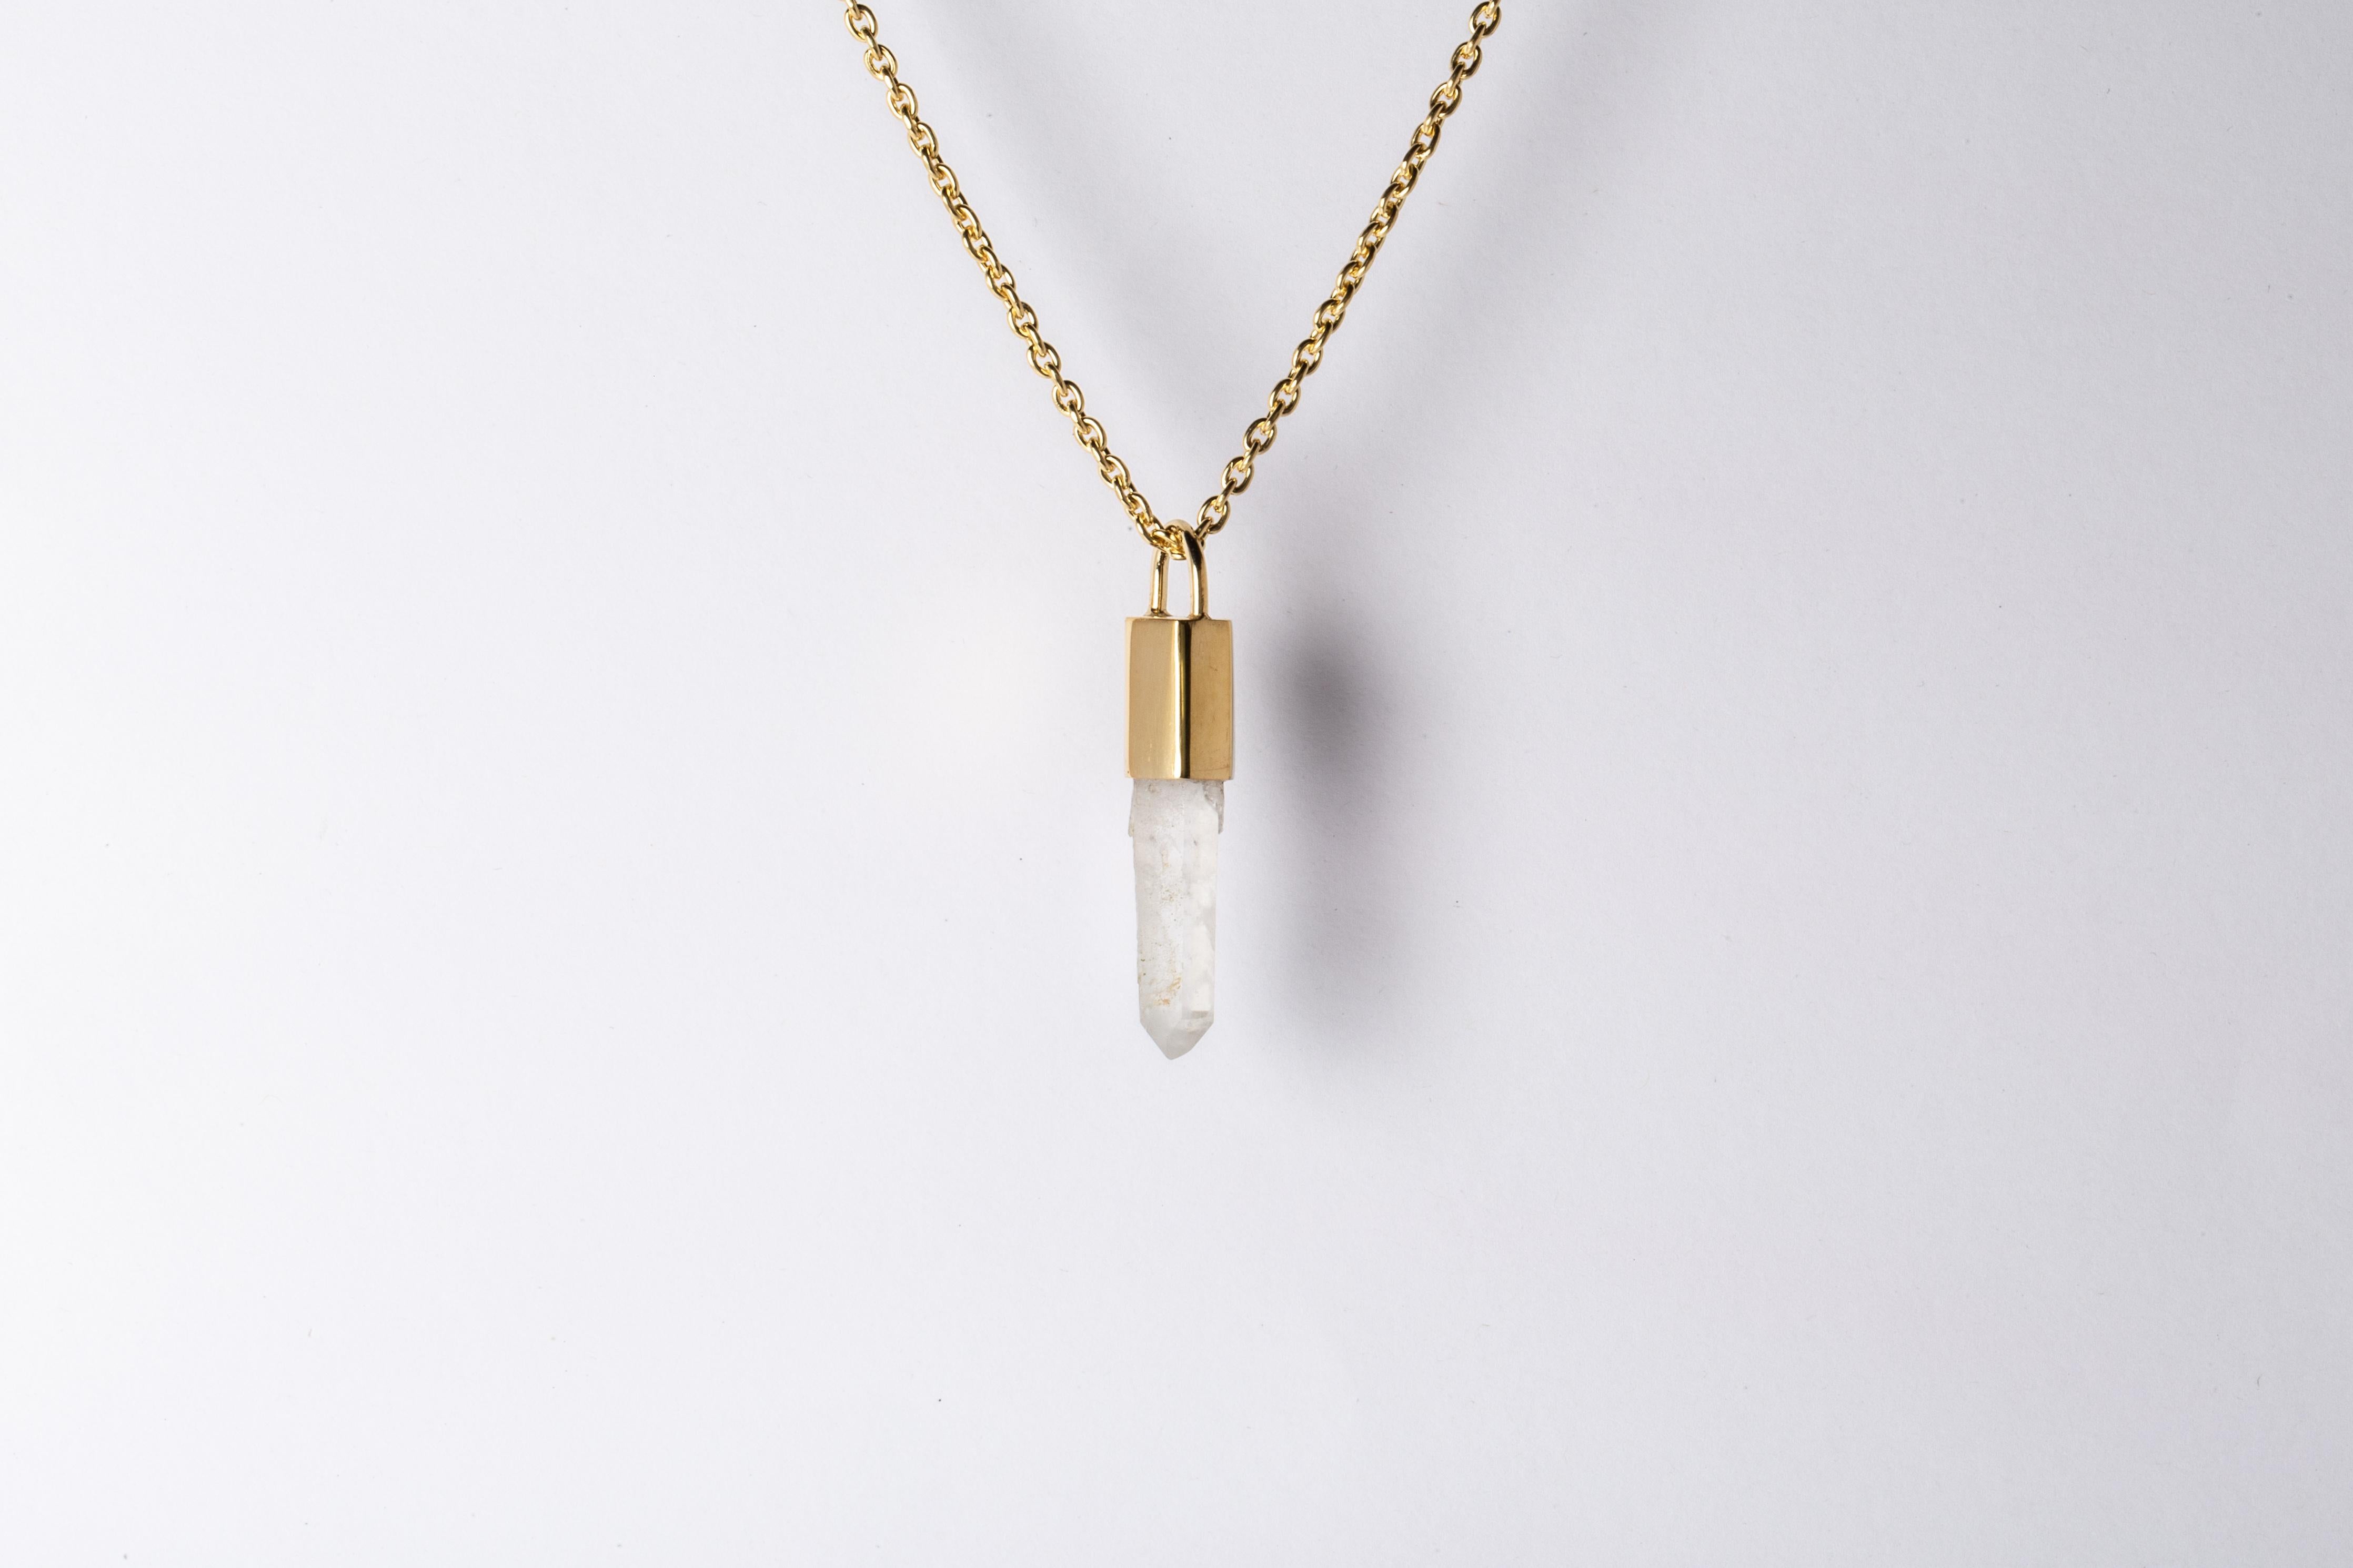 Pendant necklace in brass, sterling silver, and a rough of misc quartz. Brass and sterling silver are substrates, polished, and electroplated with 18k gold. It comes on 74 cm stelring silver chain.
The Talisman series is an exploration into the